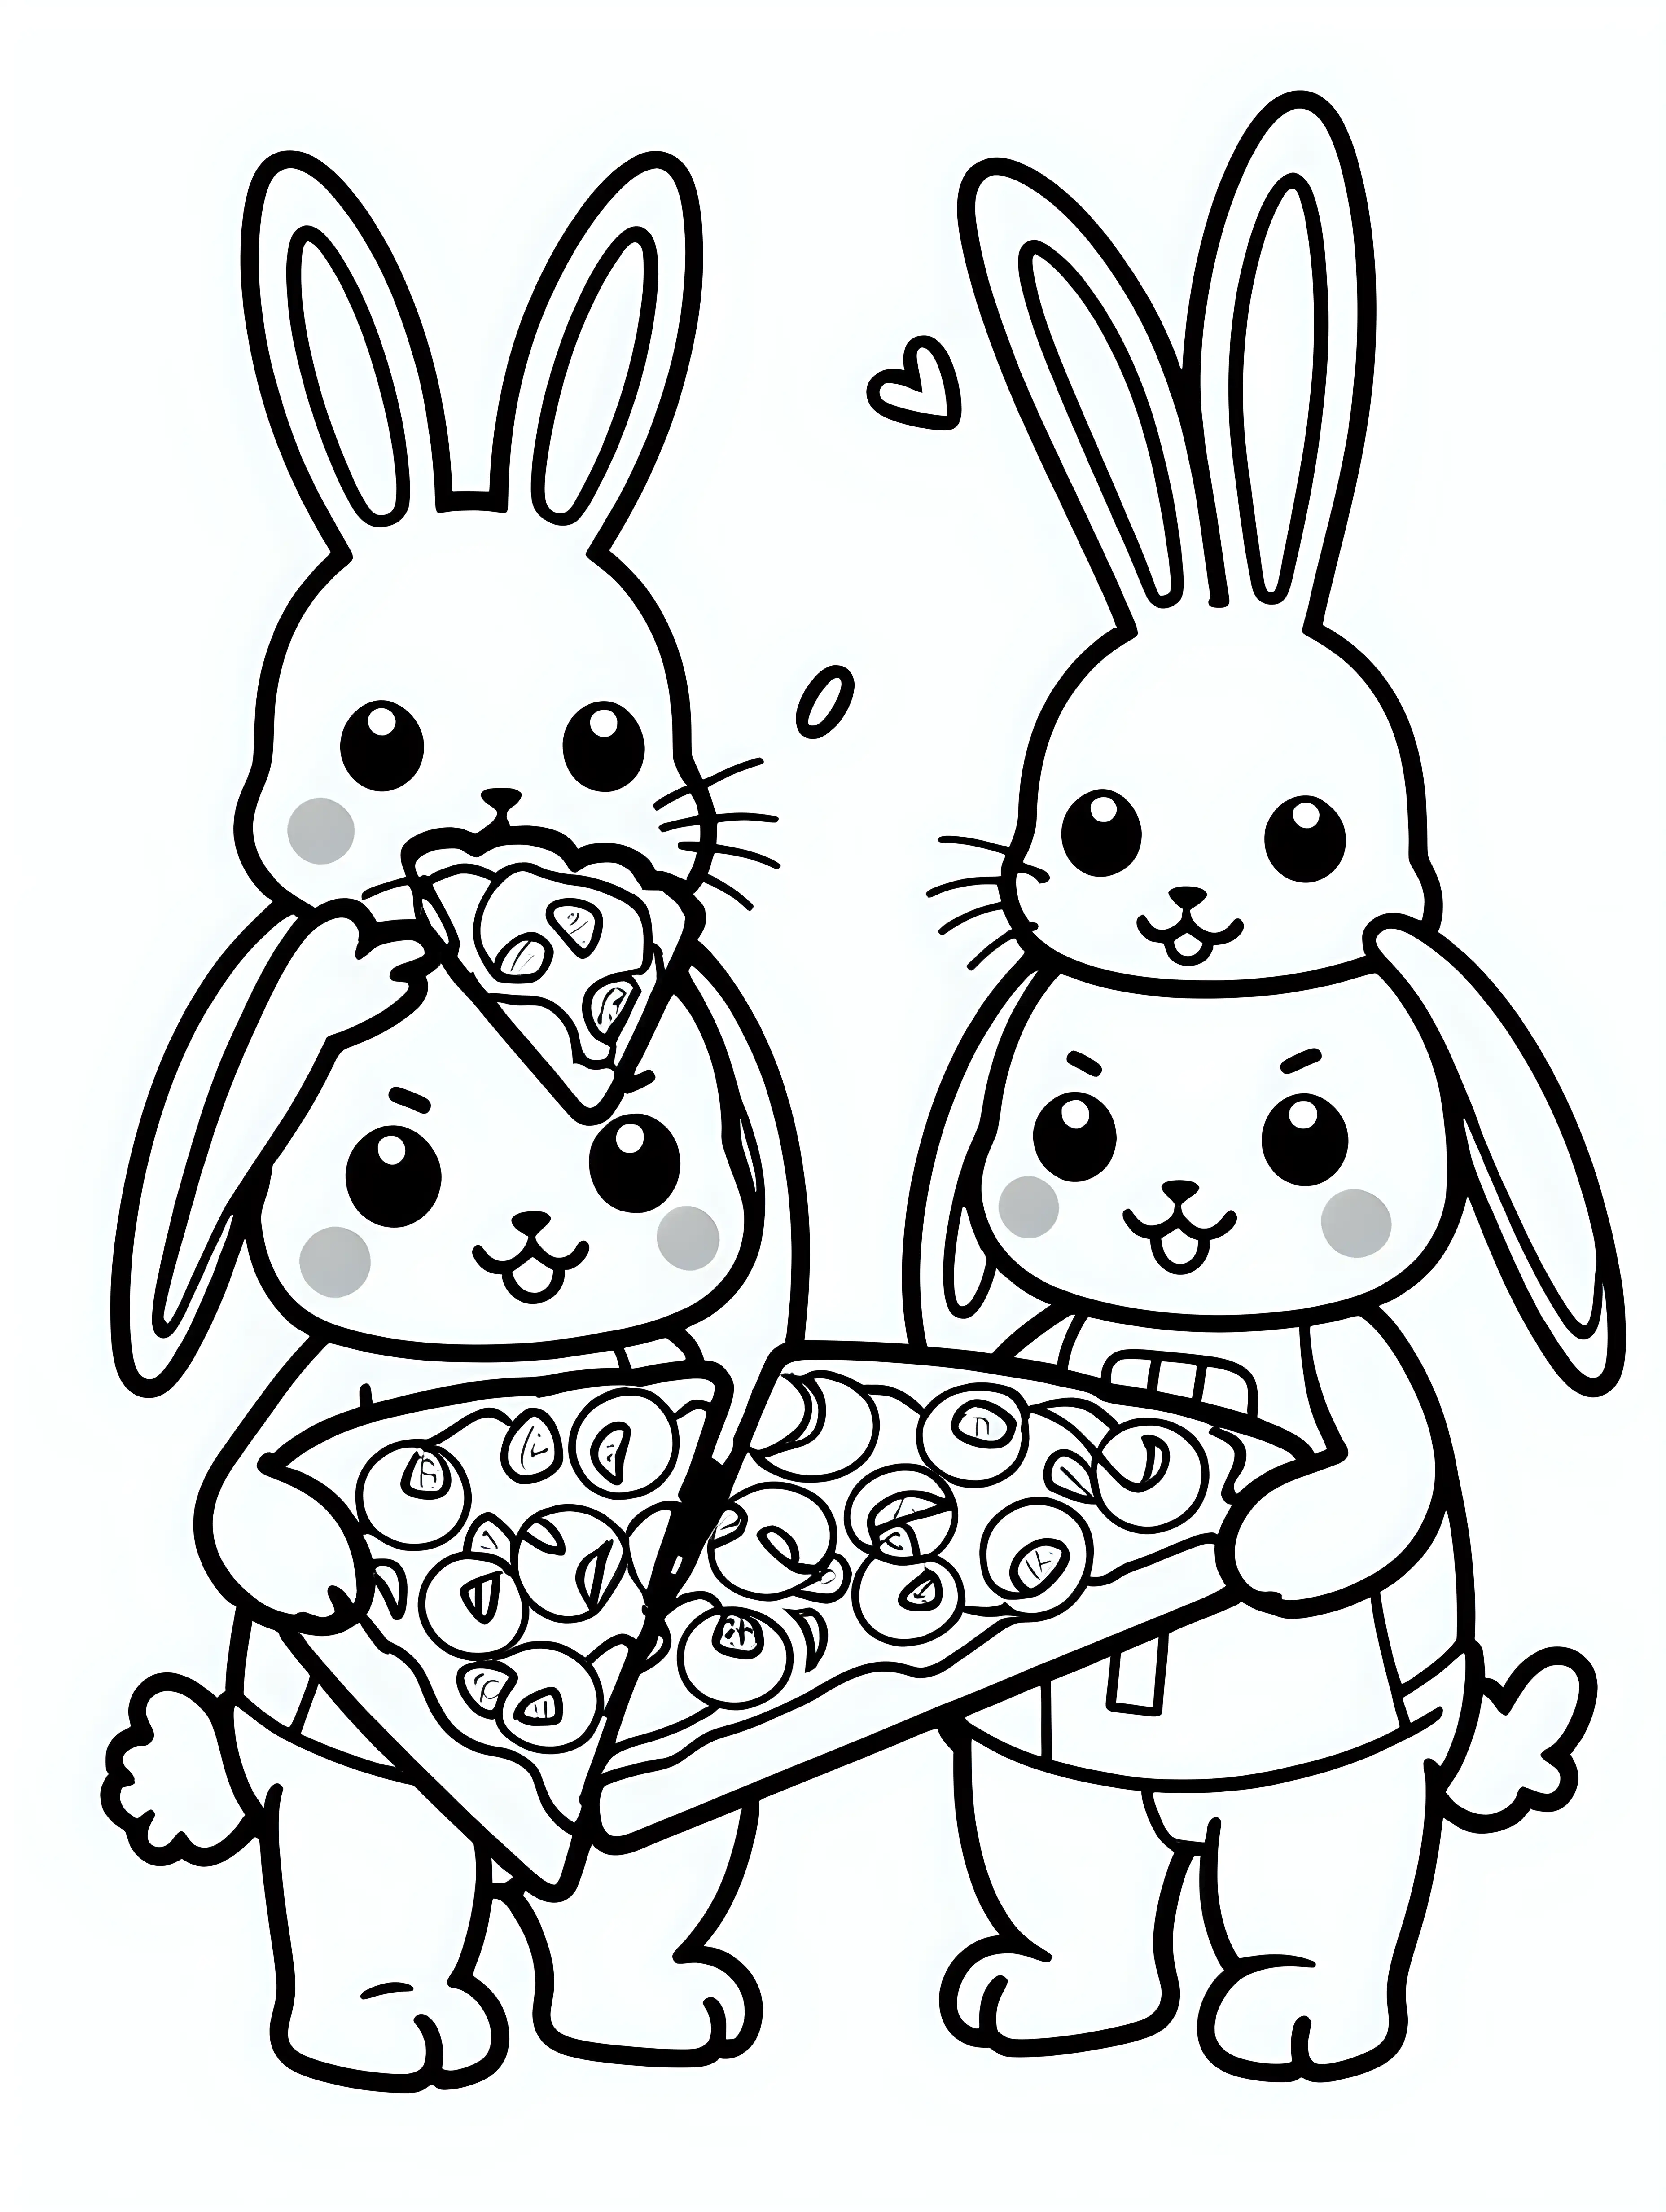 coloring page for kids with two cute kawaii bunnies eating pizza, black lines white background, only black and white